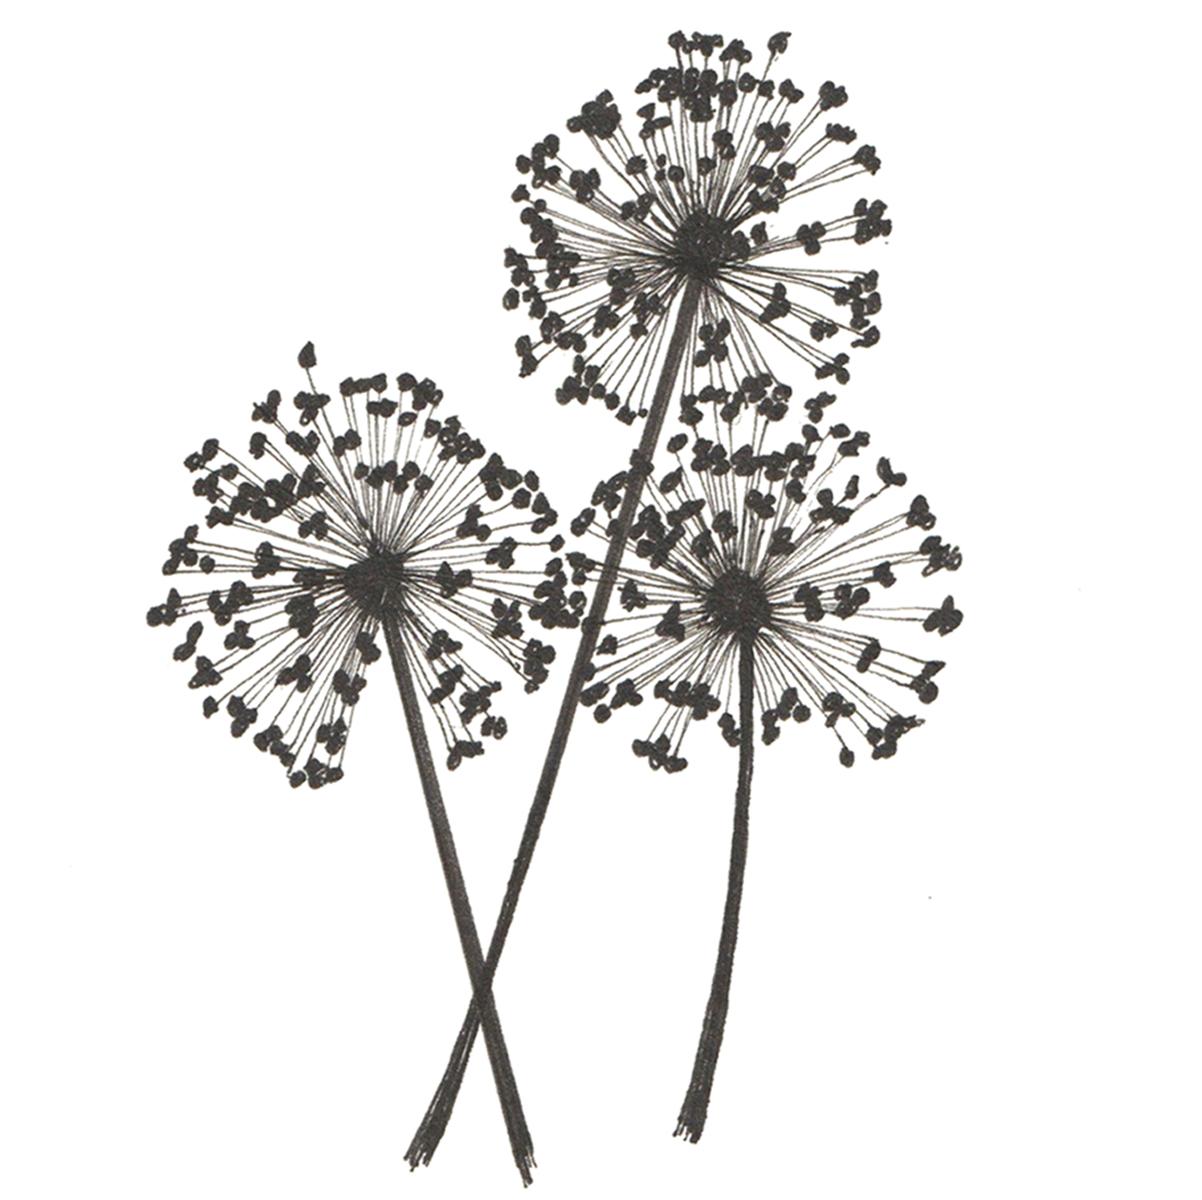 Limited edition print from pen and ink drawing of alliums